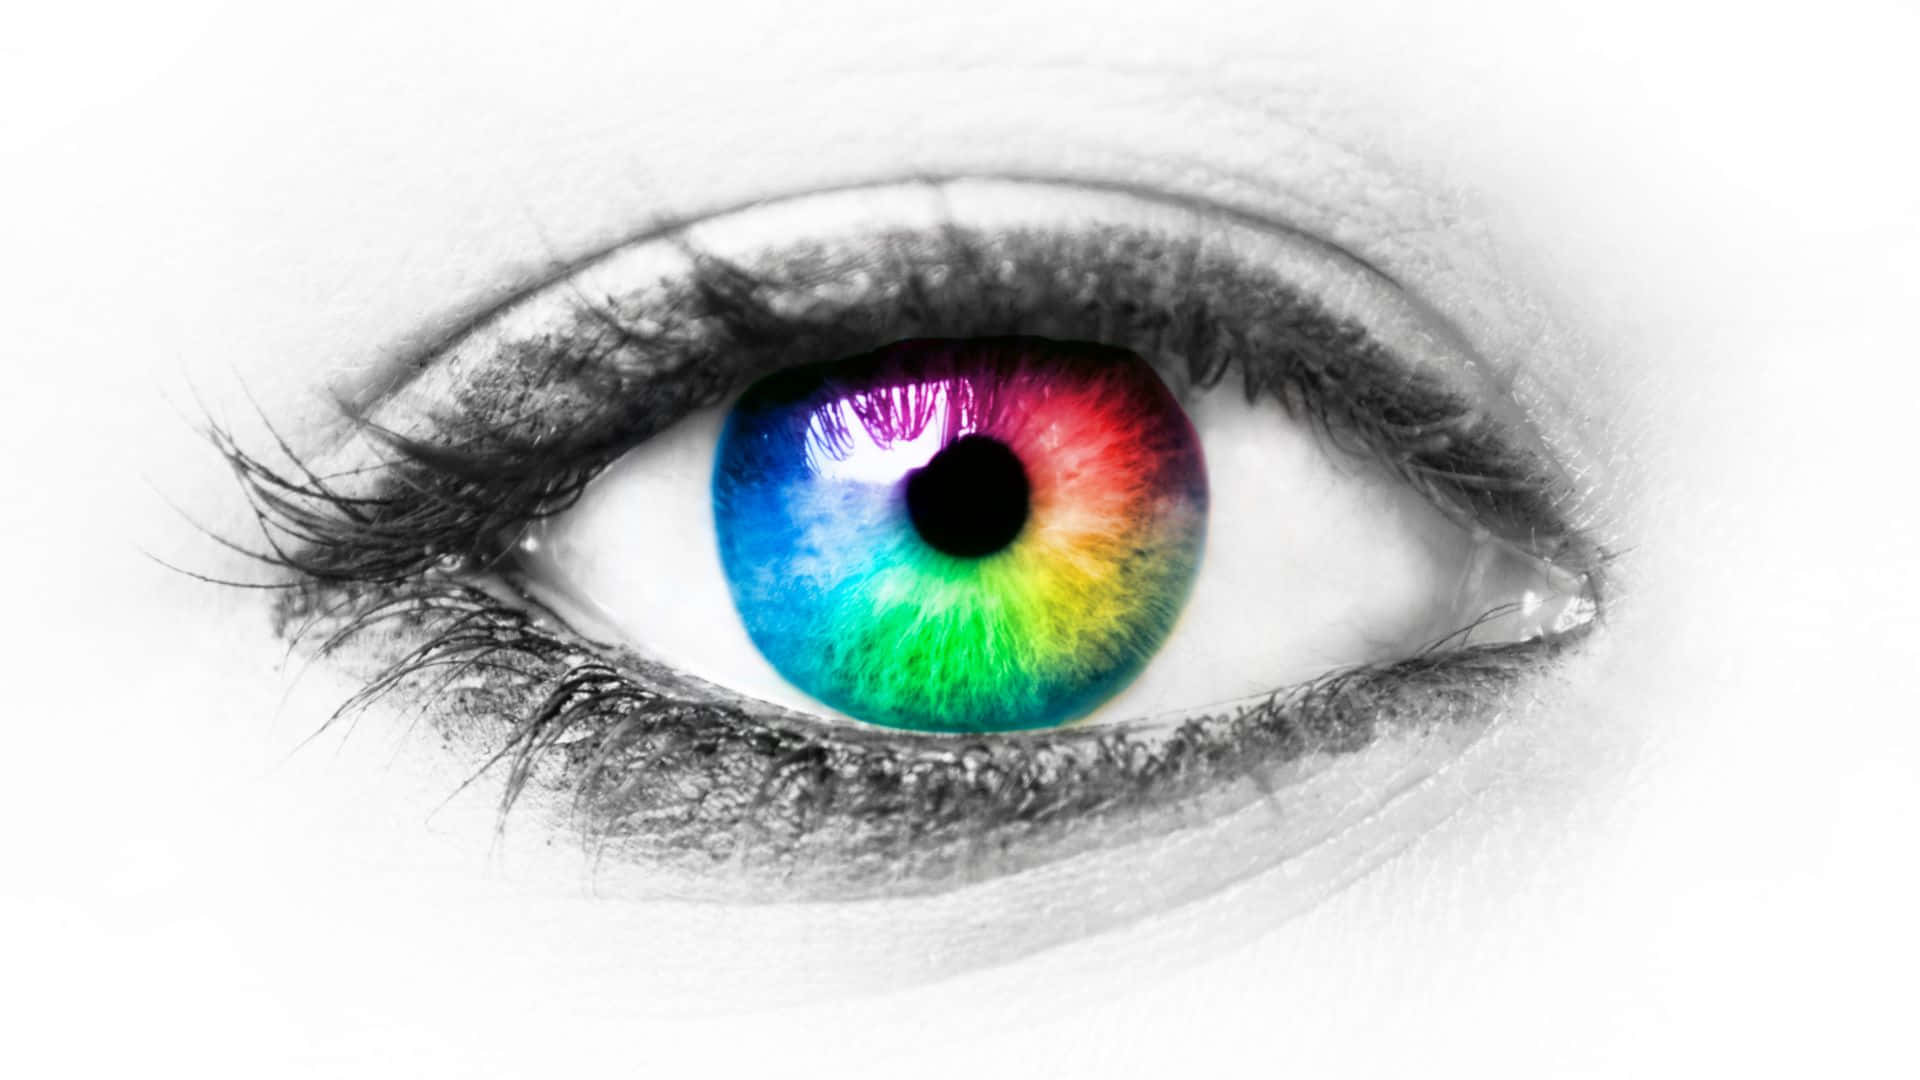 Download A Woman's Eye With A Rainbow Colored Iris | Wallpapers.com